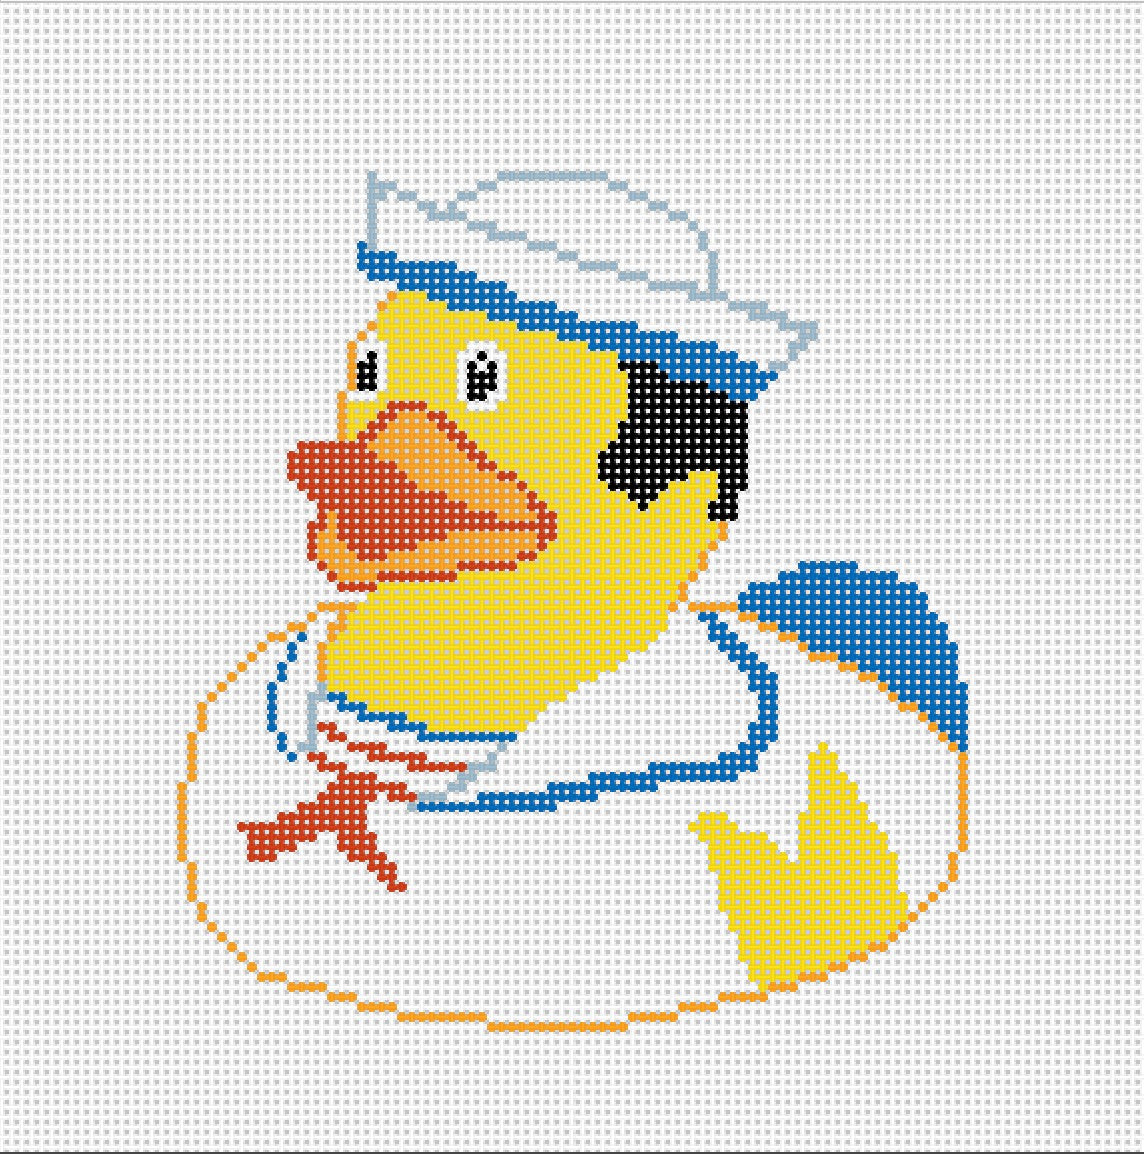 Sailor Duck - Needlepoint by Laura